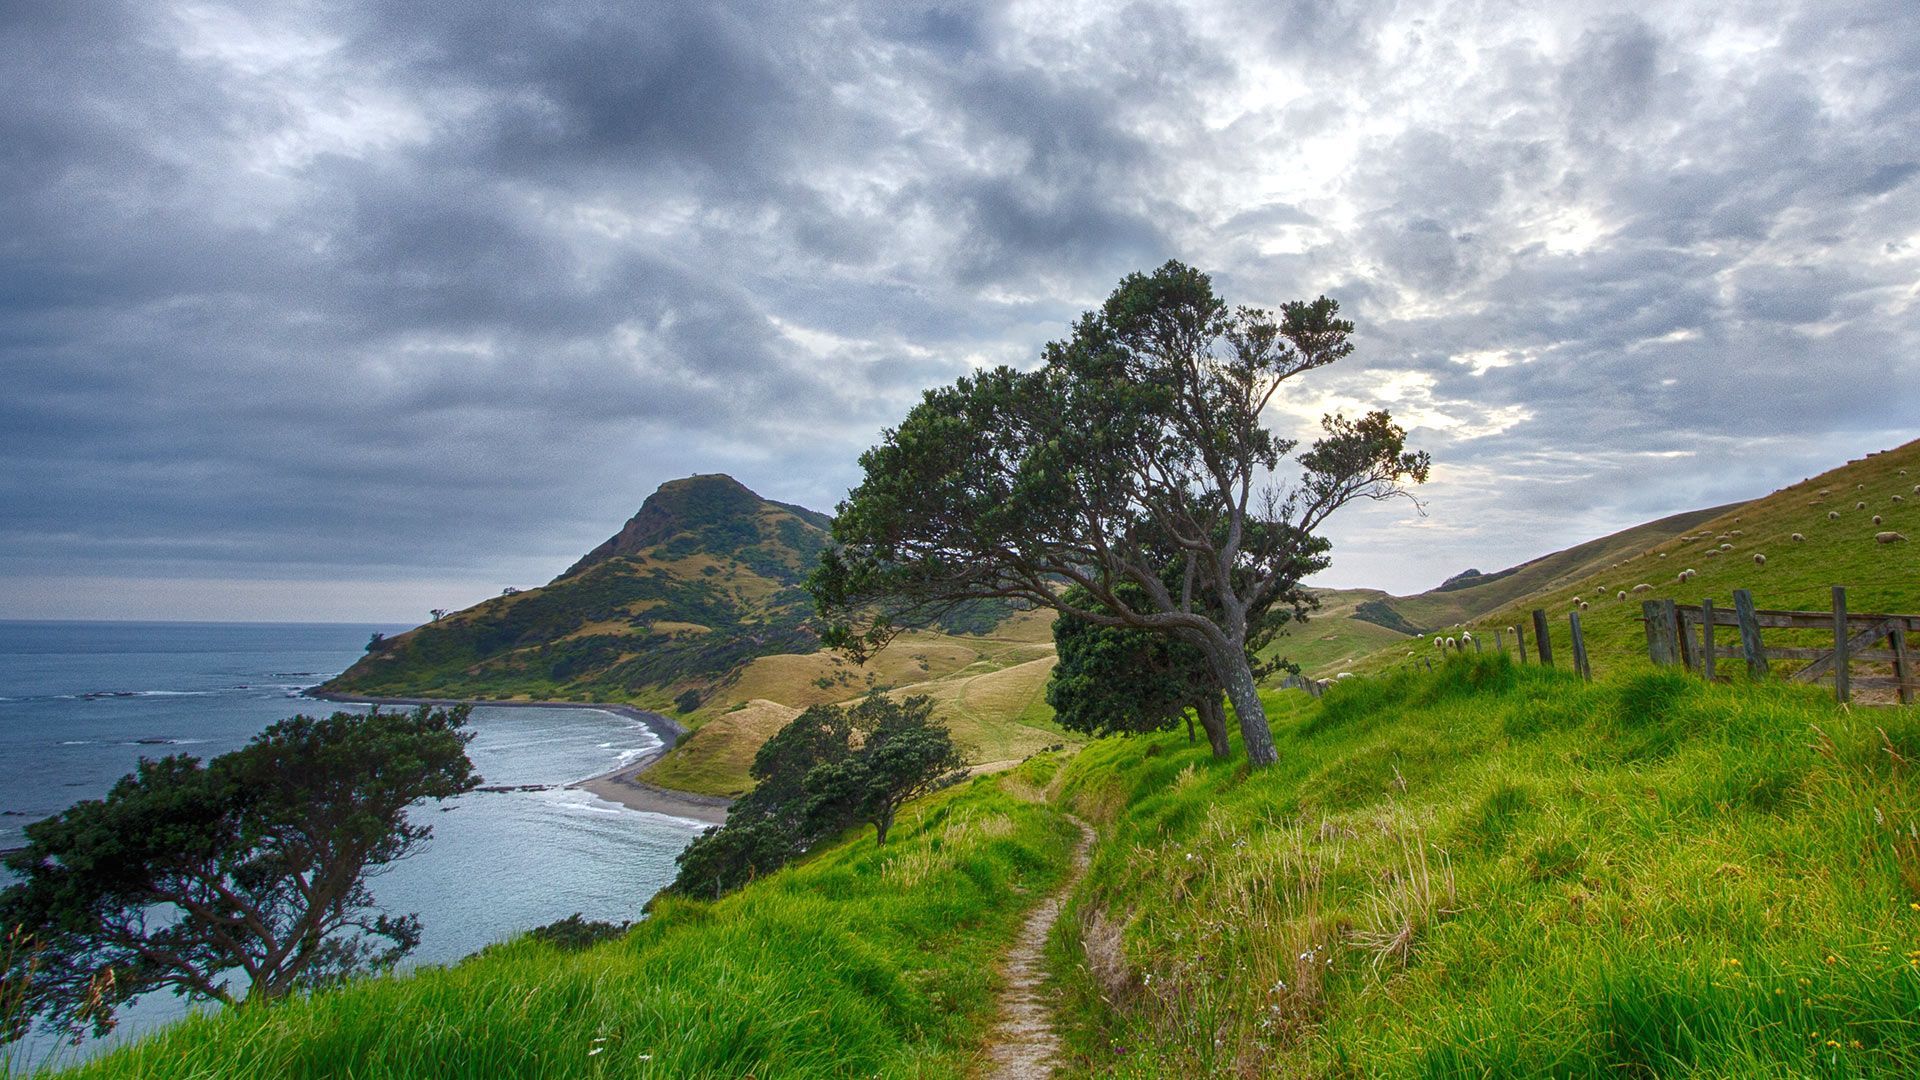 New zealand scenery wallpapers – Free full hd wallpapers for 1080p ...